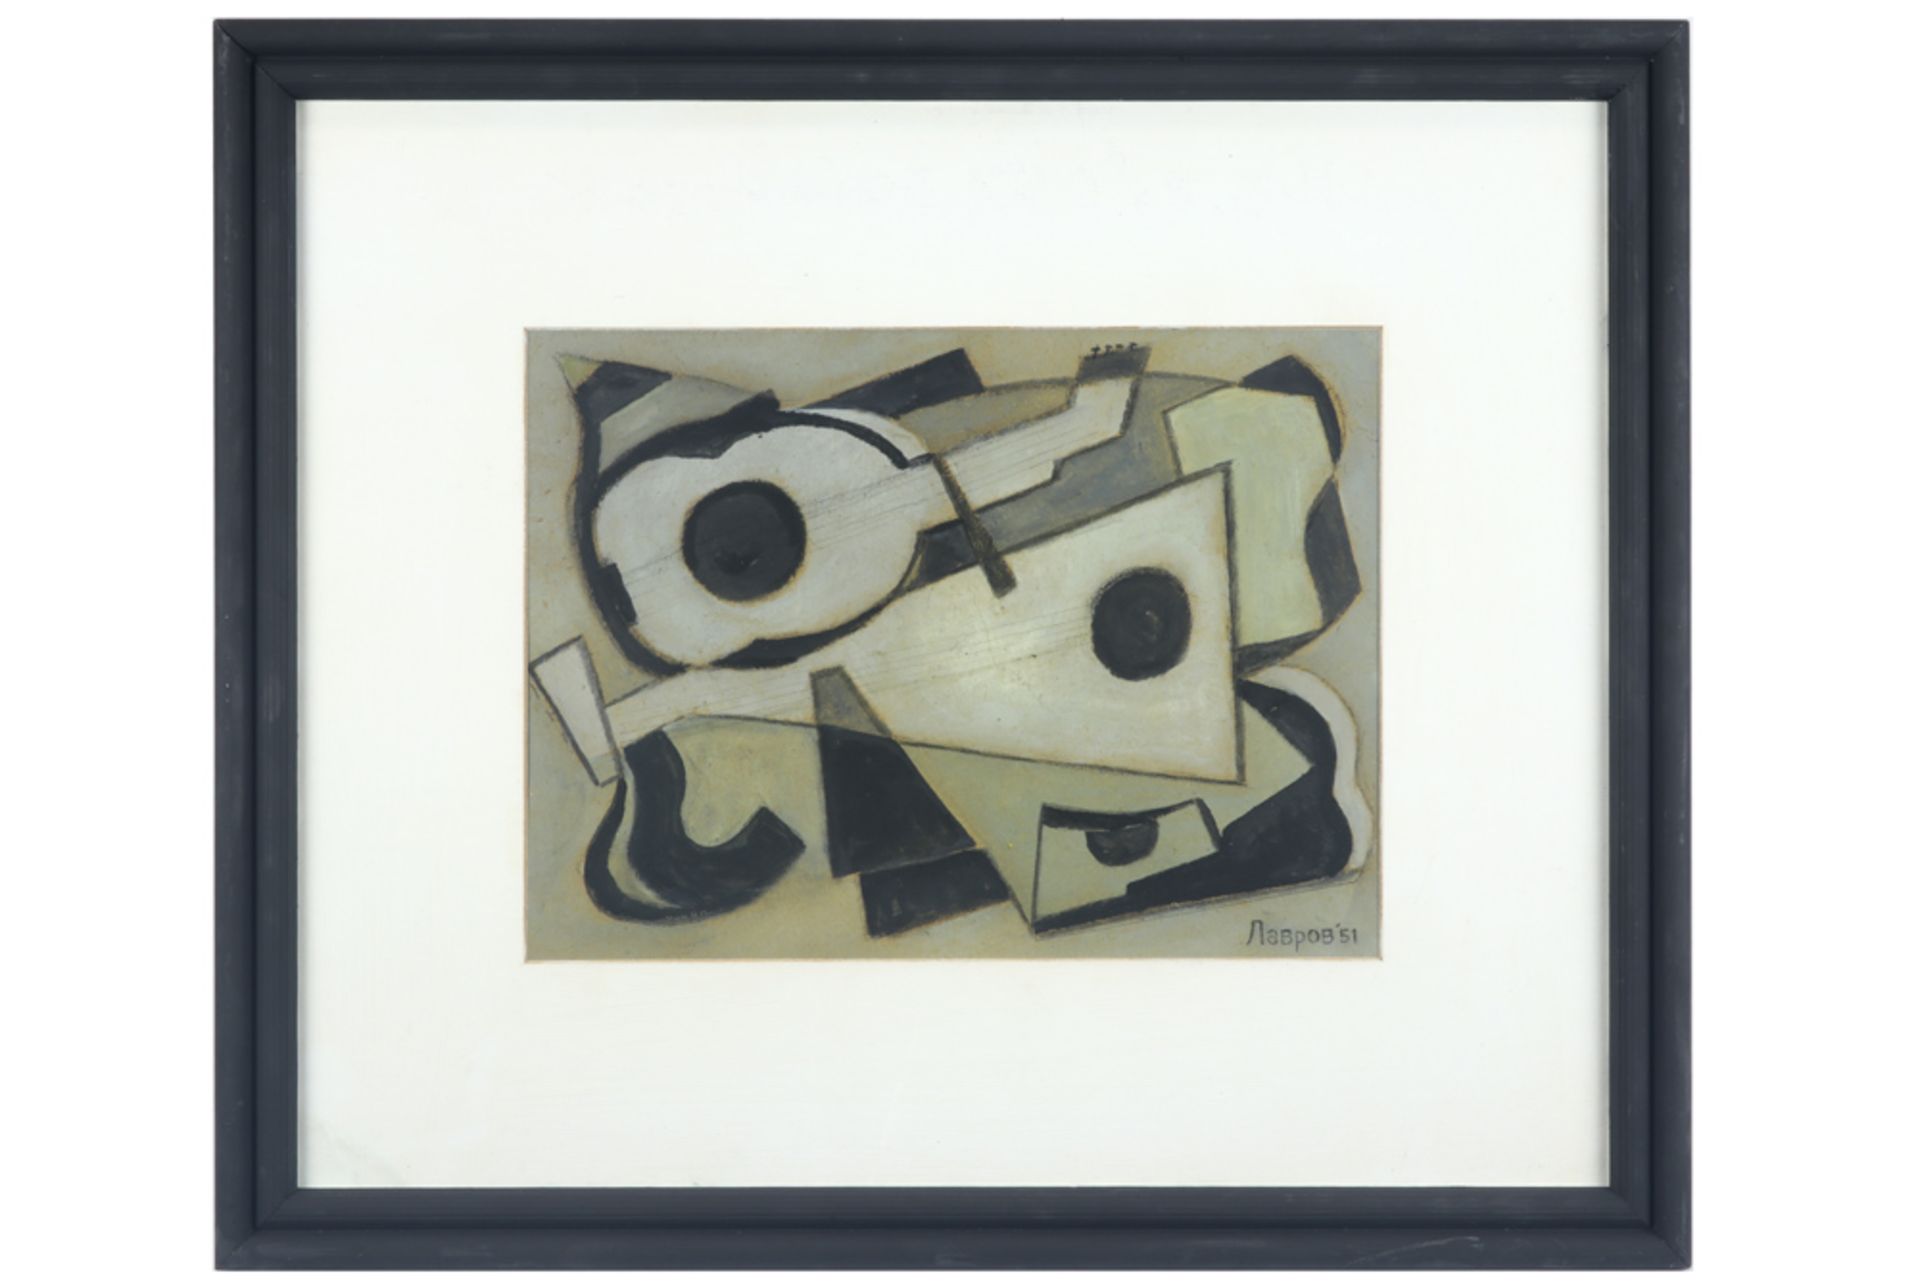 20th Cent. East European Cubist style mixed media - signed in Cyrillic and dated (19)51 || OOST- - Bild 3 aus 3